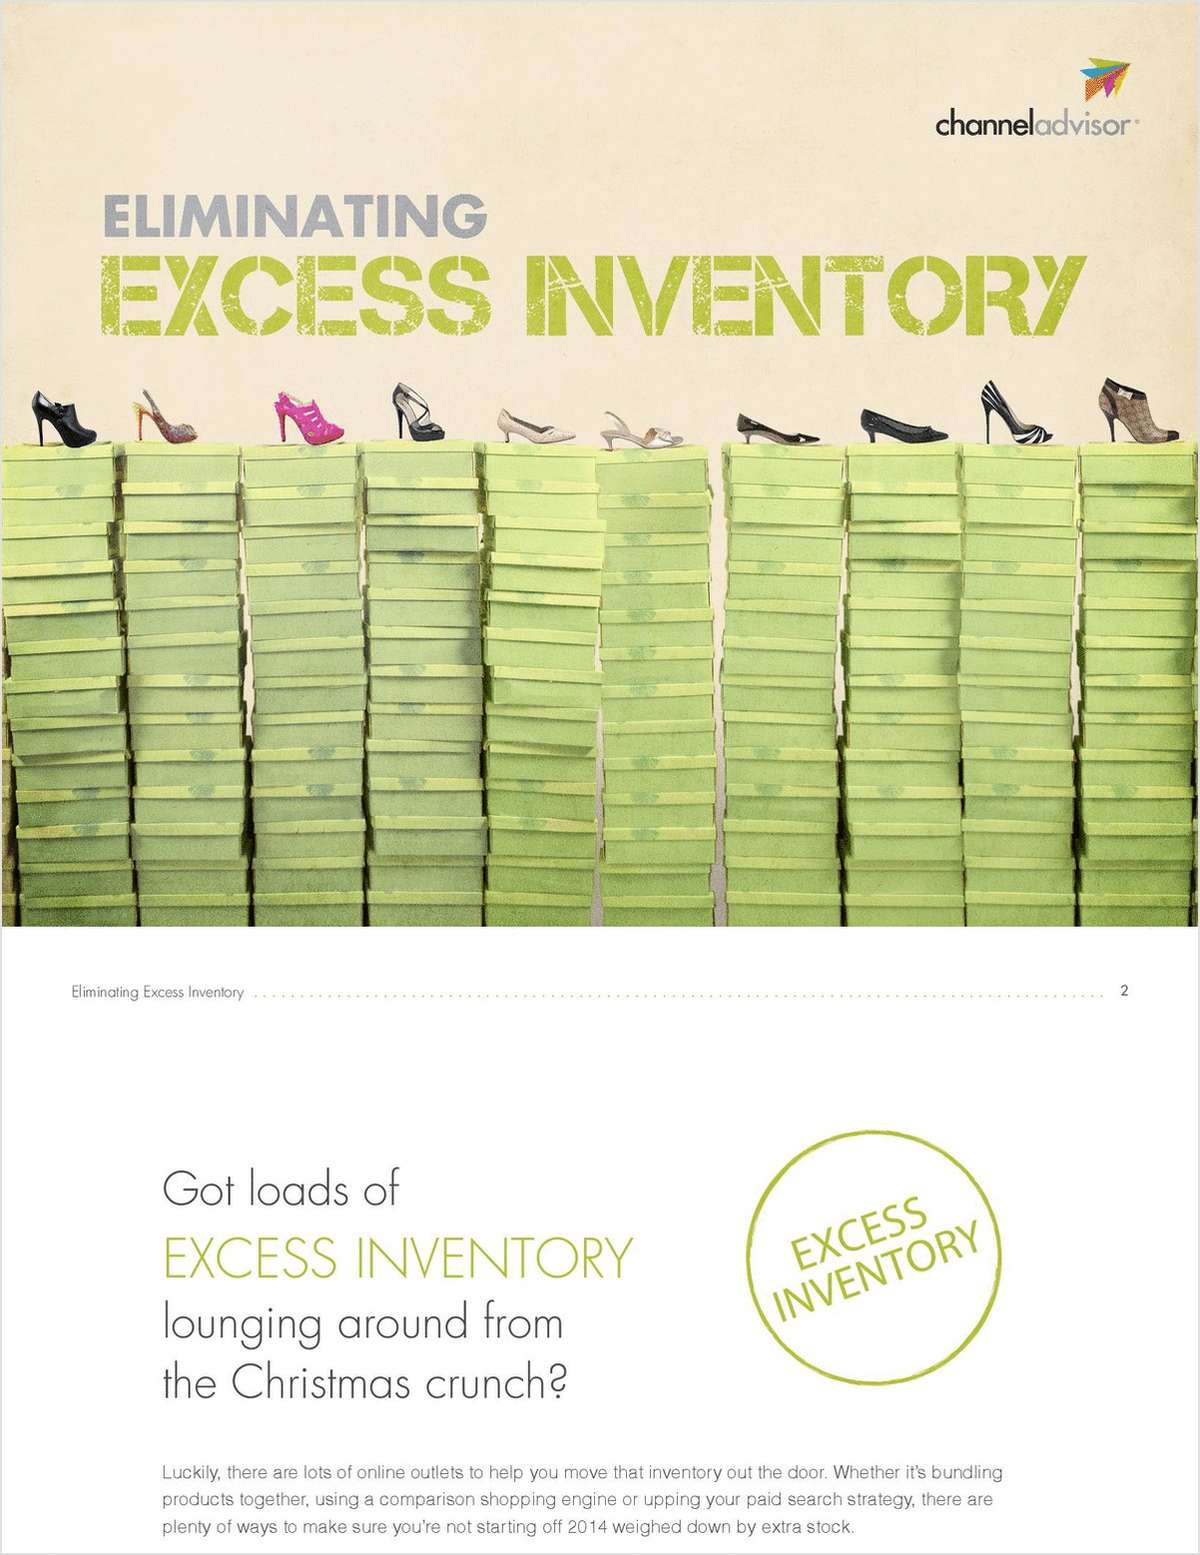 9 Tips to Help You Eliminate Your Excess Inventory